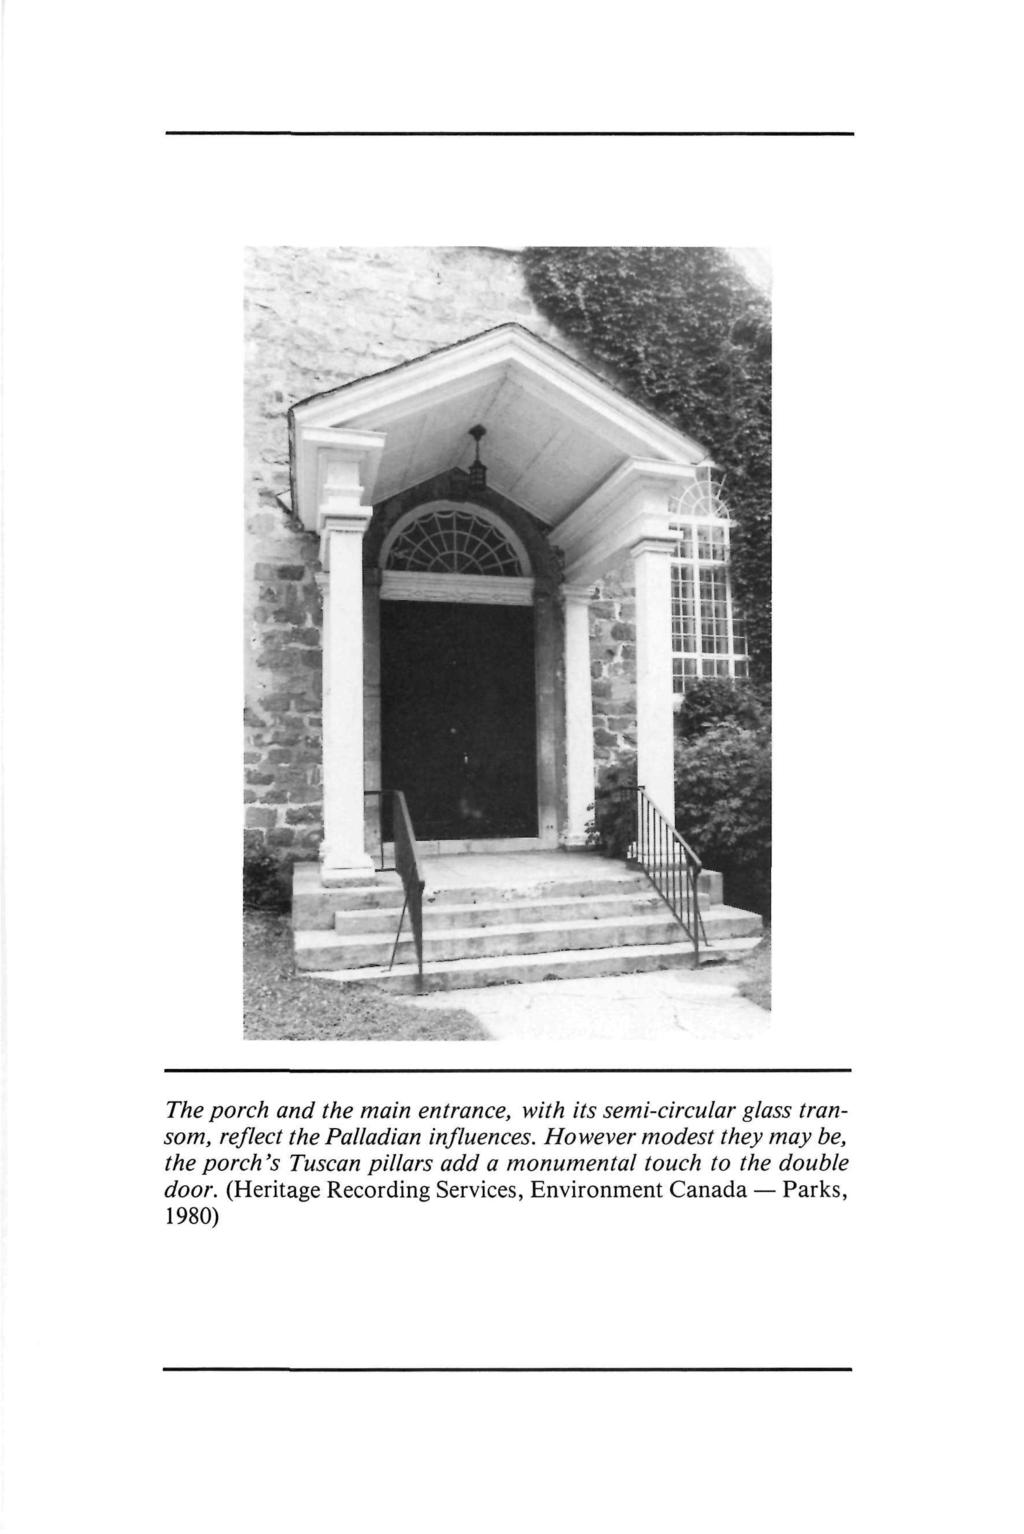 The porch and the main entrance, with its semi-circular glass transom, reflect the Palladian influences.